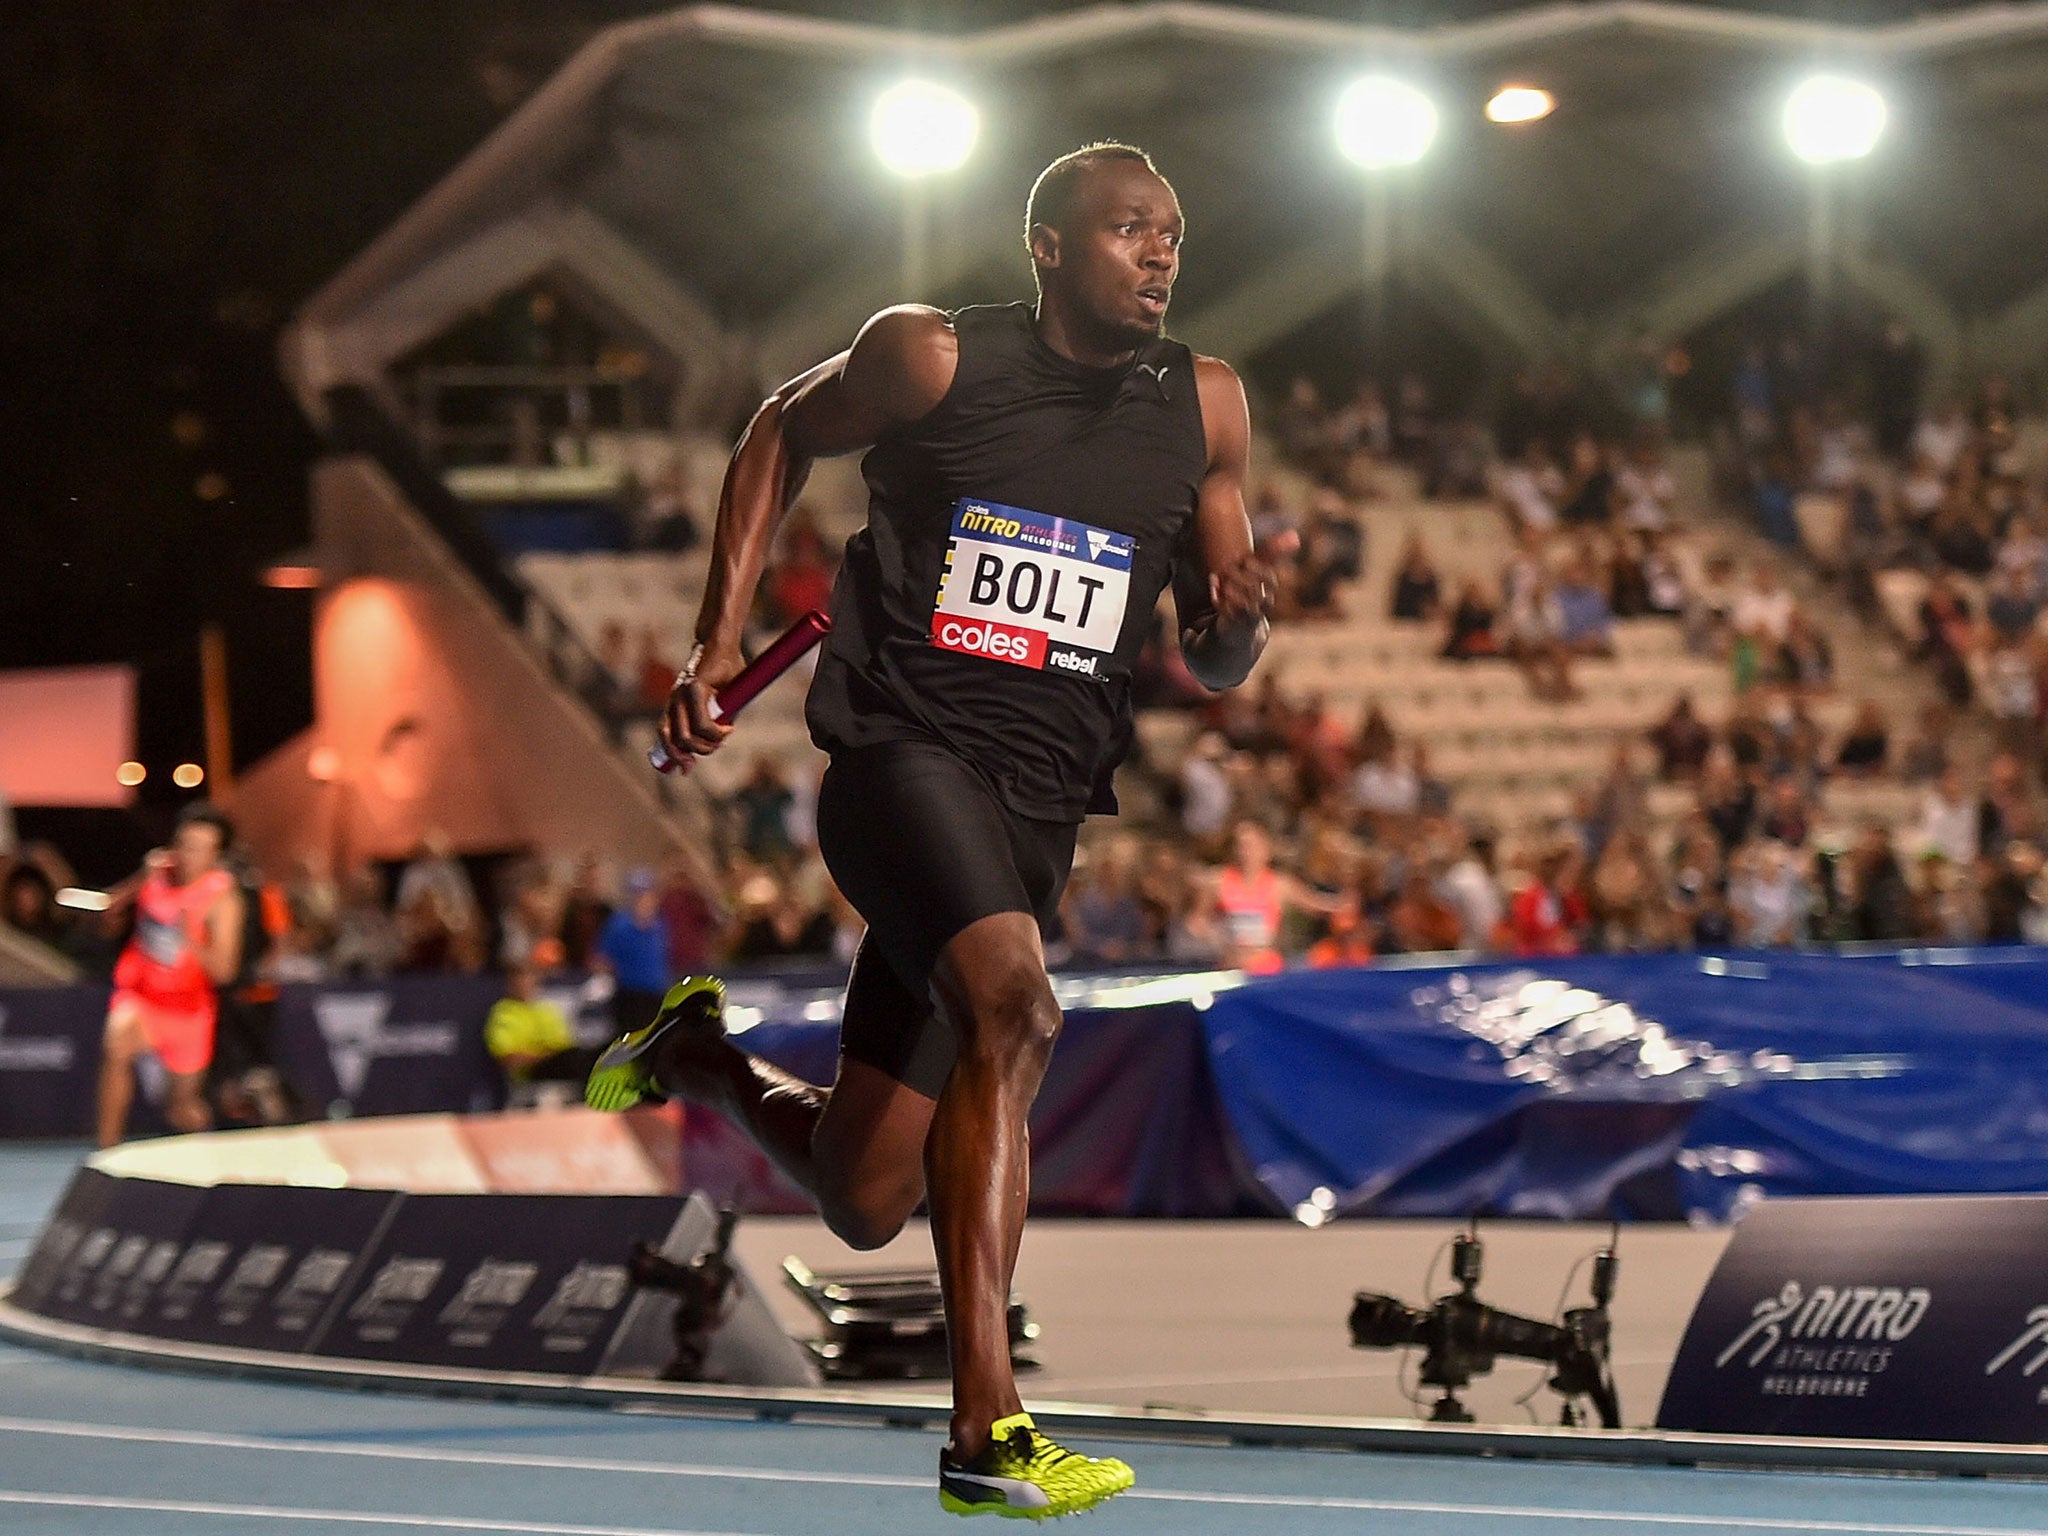 The Jamaican in action during the Nitro Athletics event in Melbourne